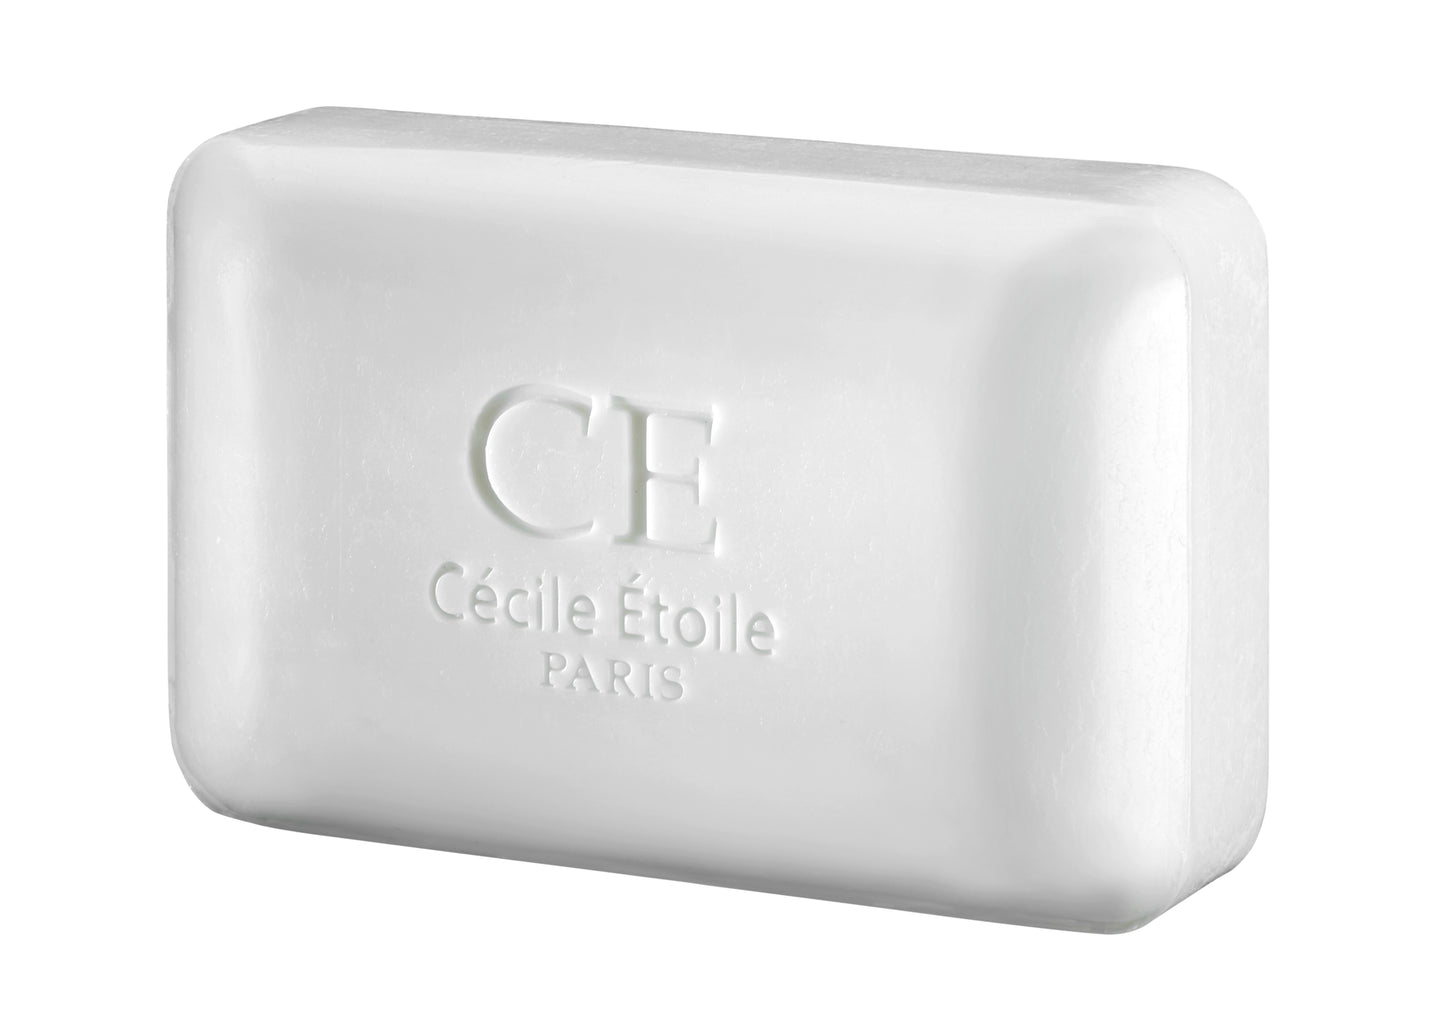 Cecile Etoile Ultra Moisturizing Cleansing Soap